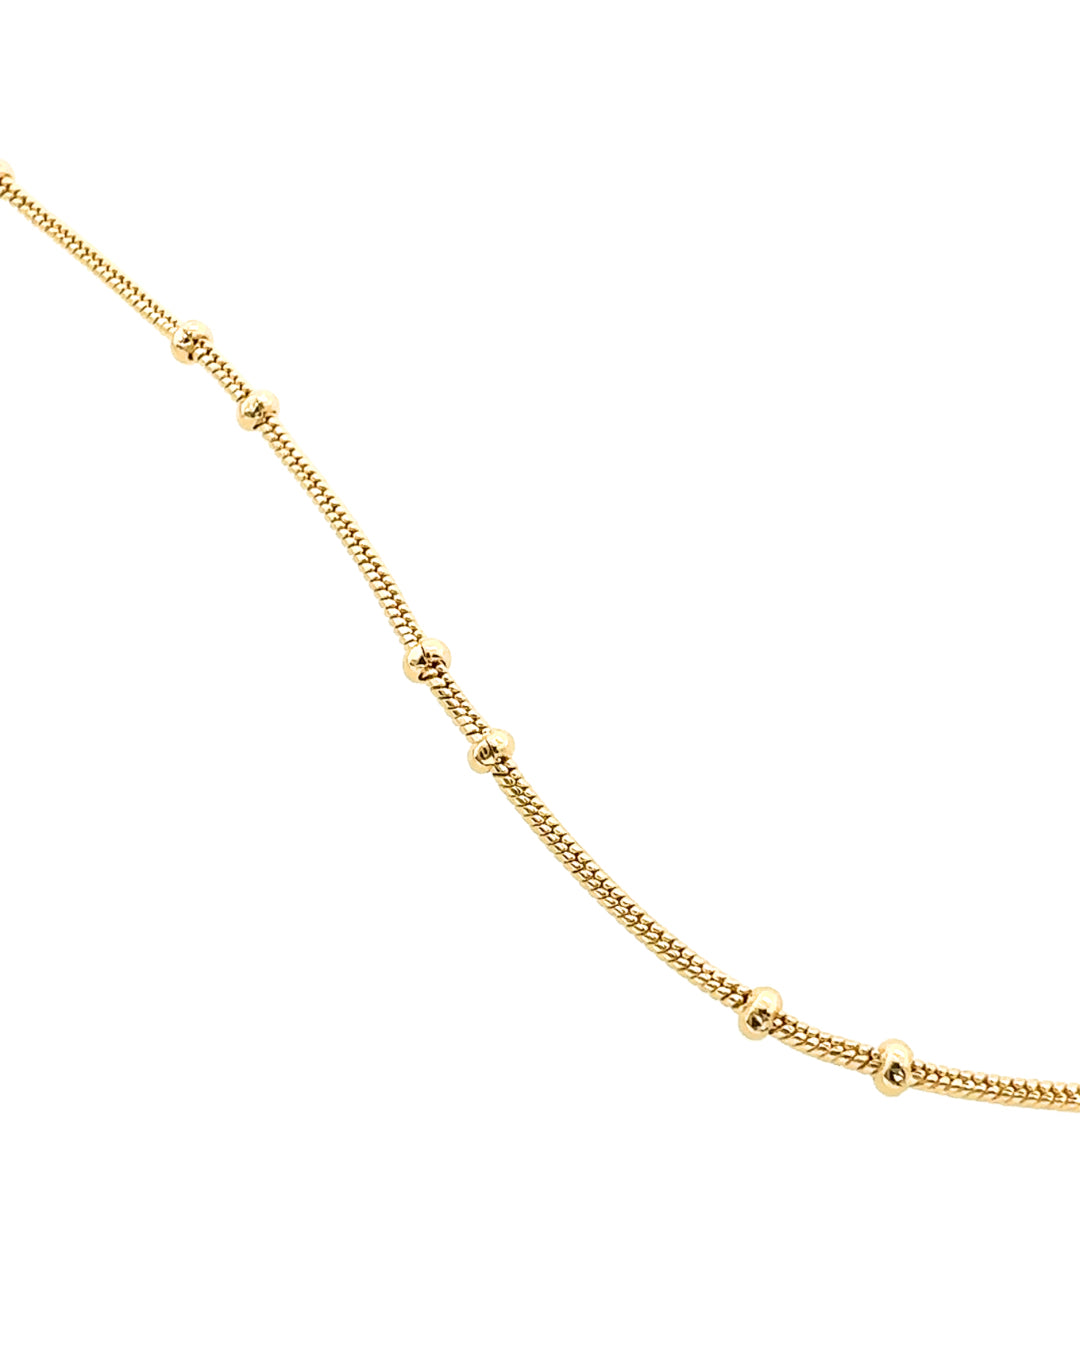 Close up of 14k yellow gold fill beaded satellite chain necklace